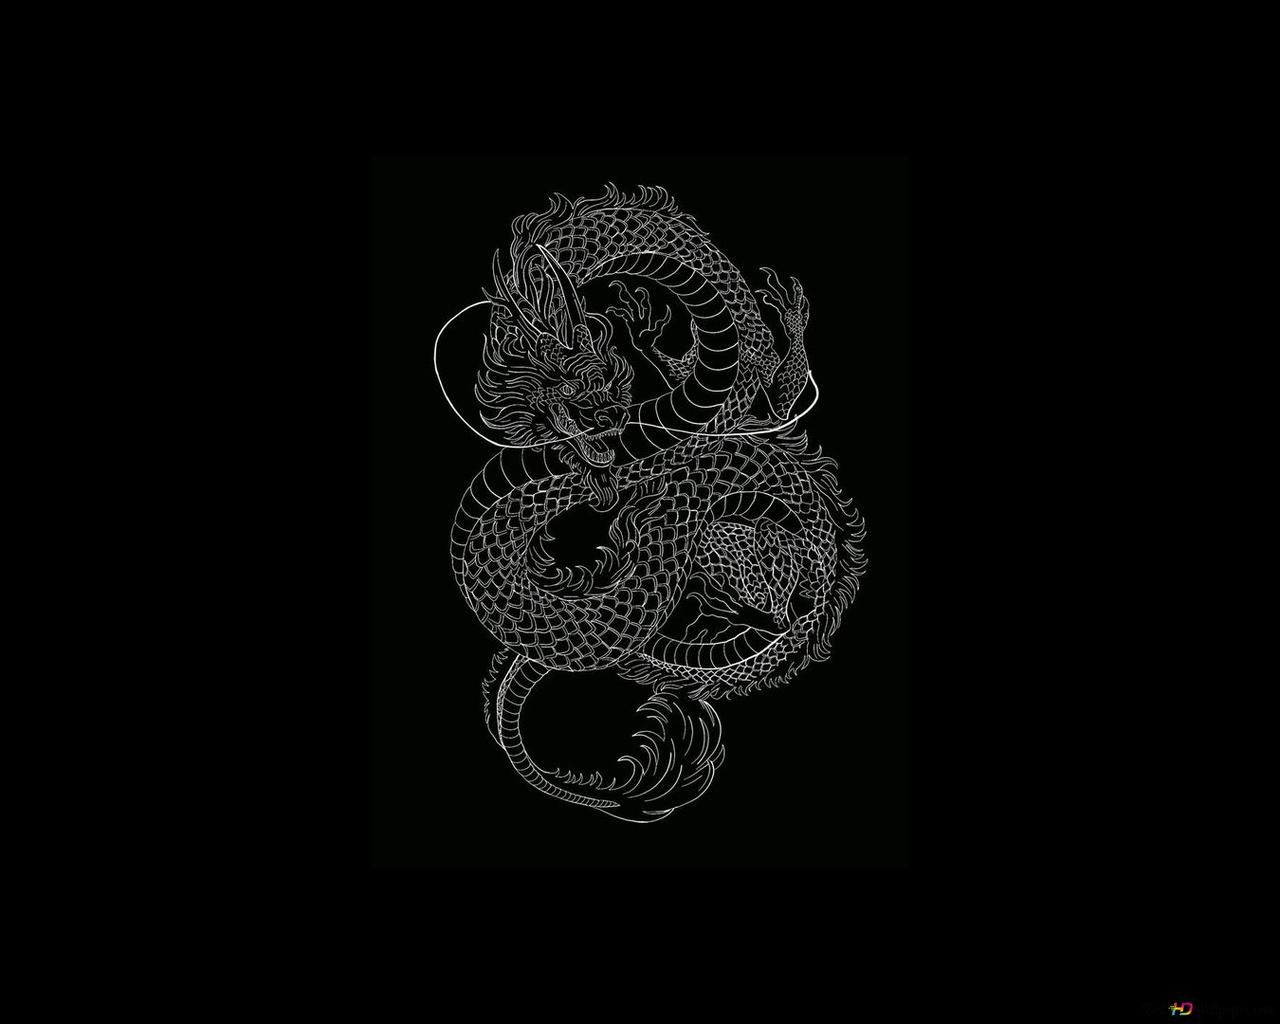 Black and white line art of a dragon on a black background - Dragon